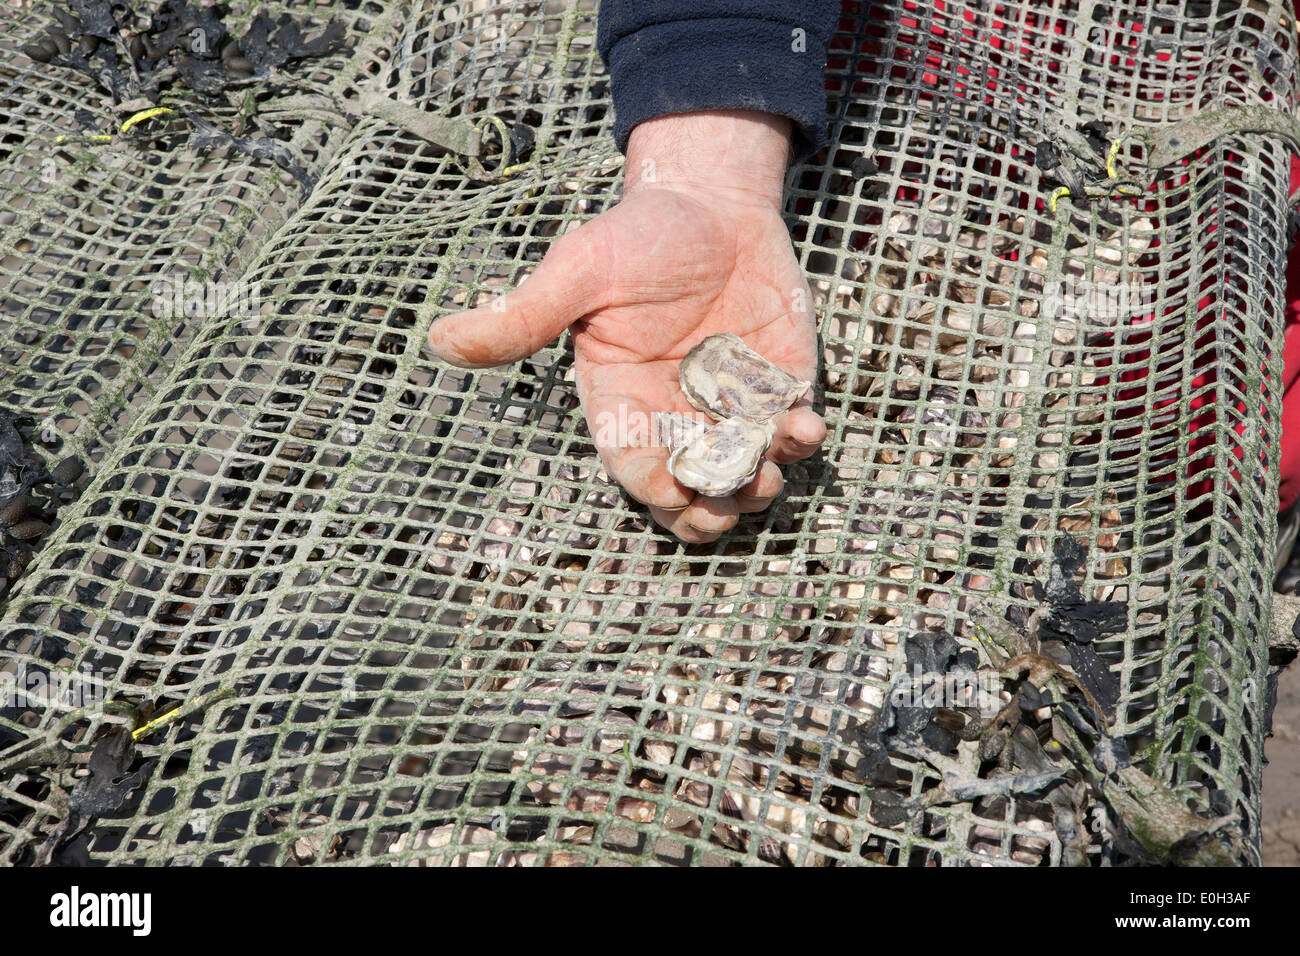 Tim Marshall looking at the Oysters in racks on the seashore at Rock in Cornwall Stock Photo